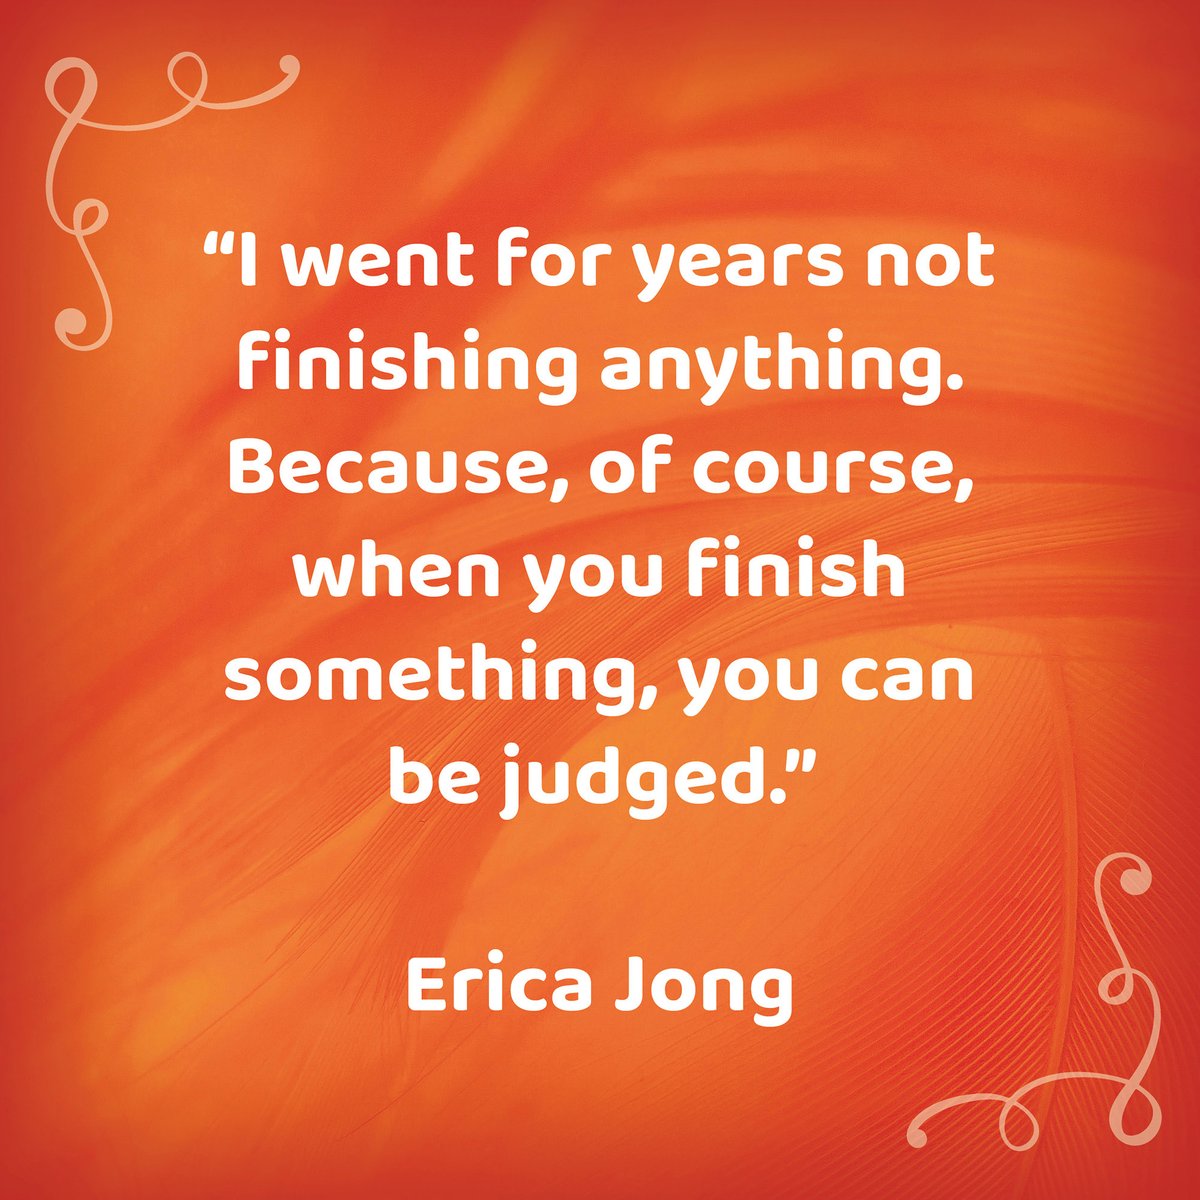 The quote of the week for the teens in my creative writing classes comes from writer Erica Jong: “I went for years not finishing anything. Because, of course, when you finish something, you can be judged.” More thoughts on this quote on my blog: kendrakandlestar.wordpress.com/2024/05/15/wis…